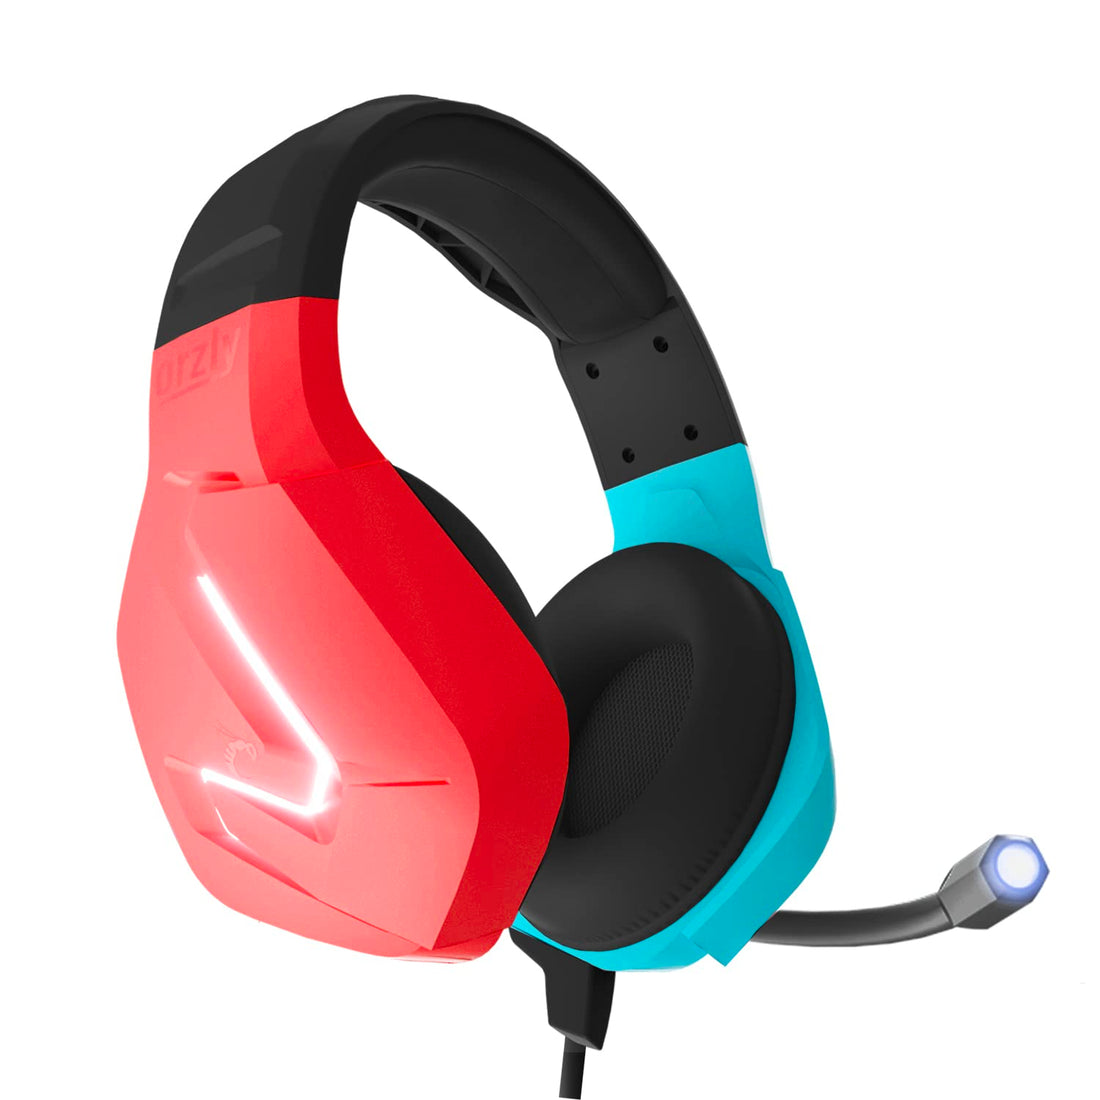 Orzly Gaming Headset with Mic Compatible with Nintendo Switch Joycon Colour Match & Added Features Gaming Consoles PC Xbox ps4 ps5 MacBook.Led Light,Microphone & Remote -Hornet RXH-20 Tanami Edition